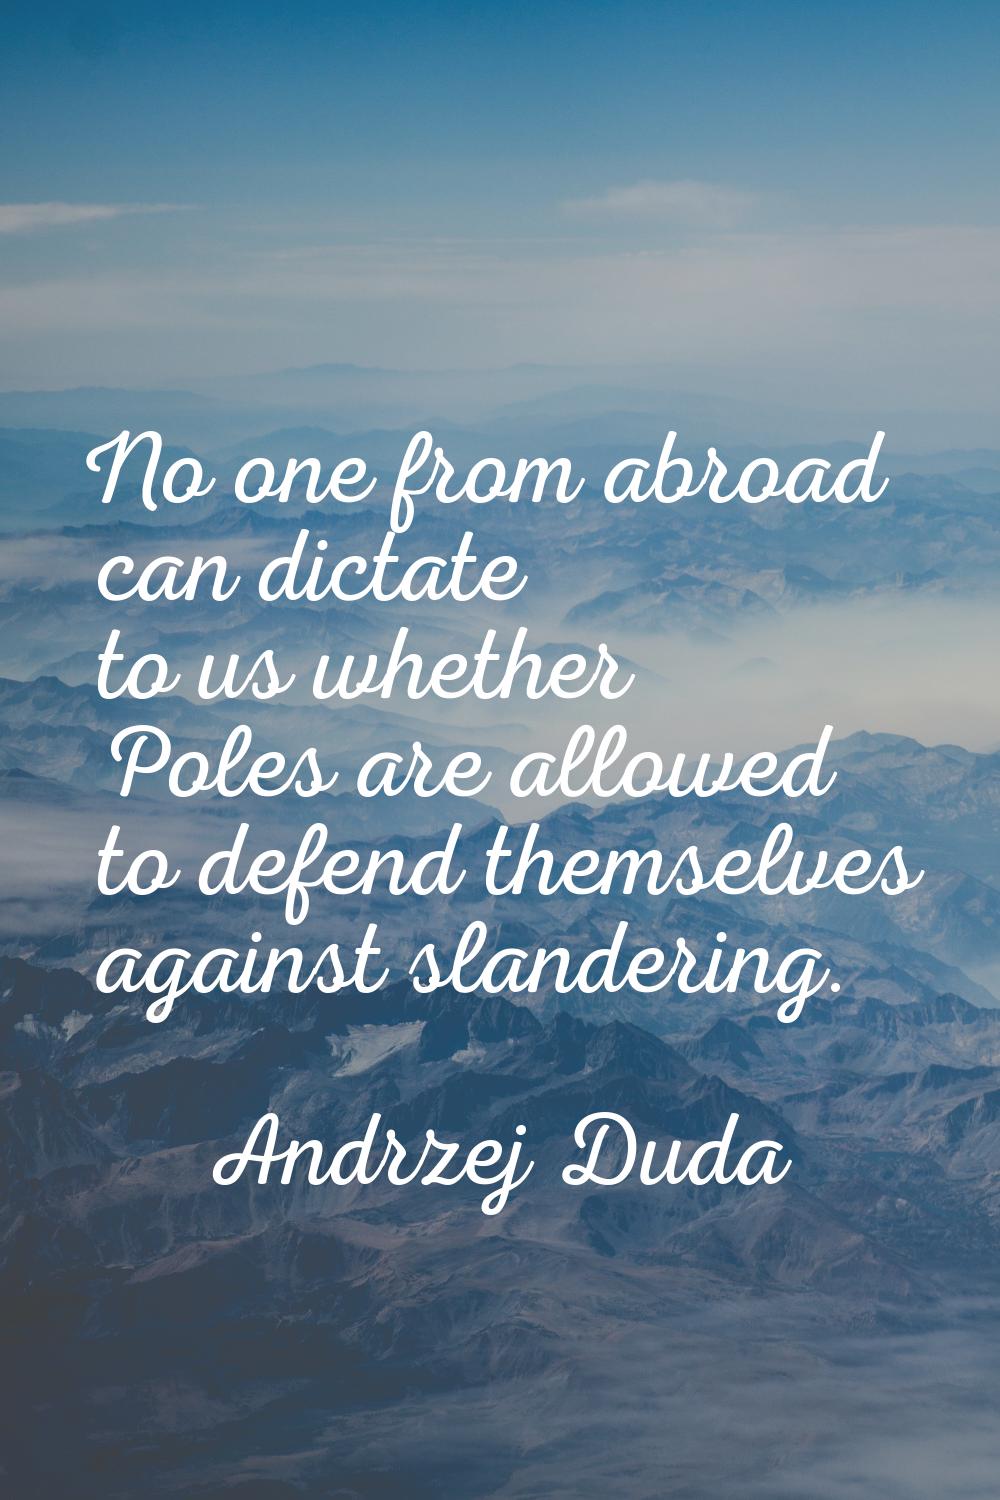 No one from abroad can dictate to us whether Poles are allowed to defend themselves against slander